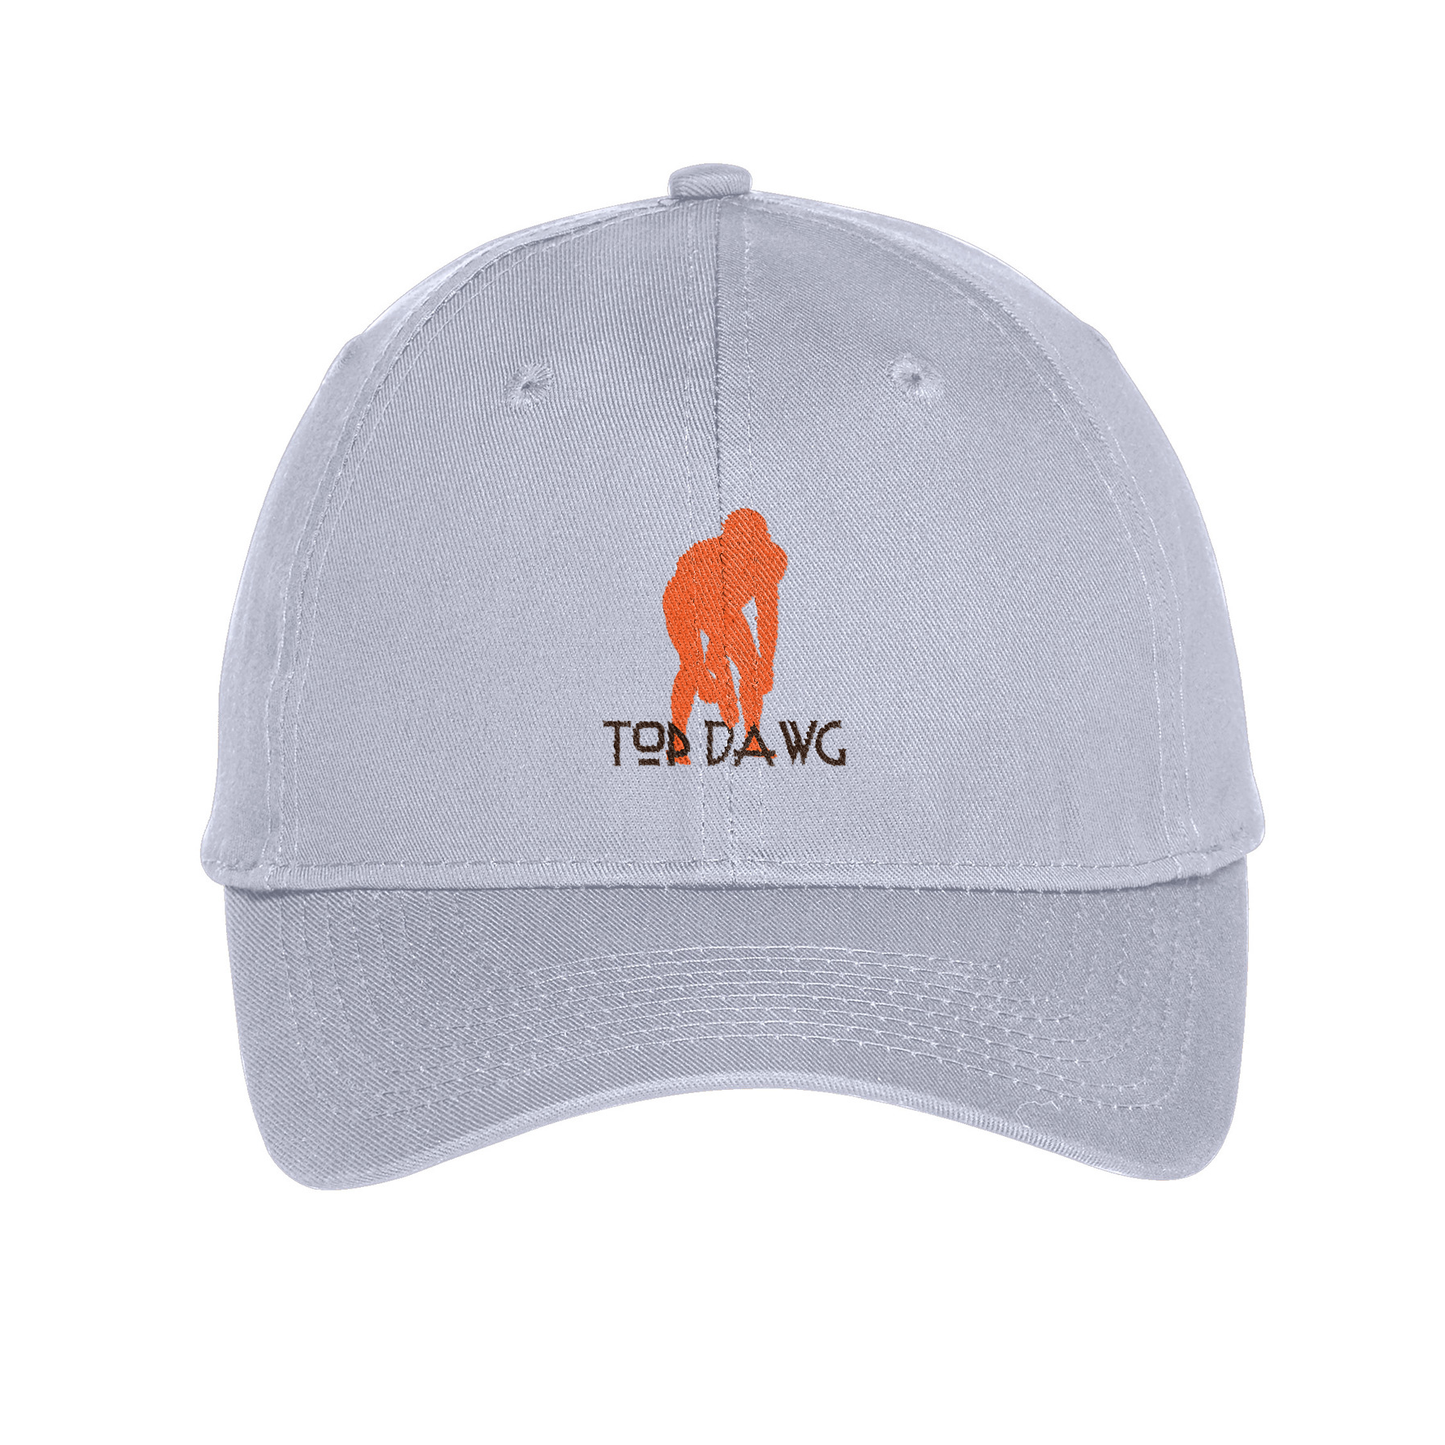 GT Top Dawg Embroidered Twill Cap